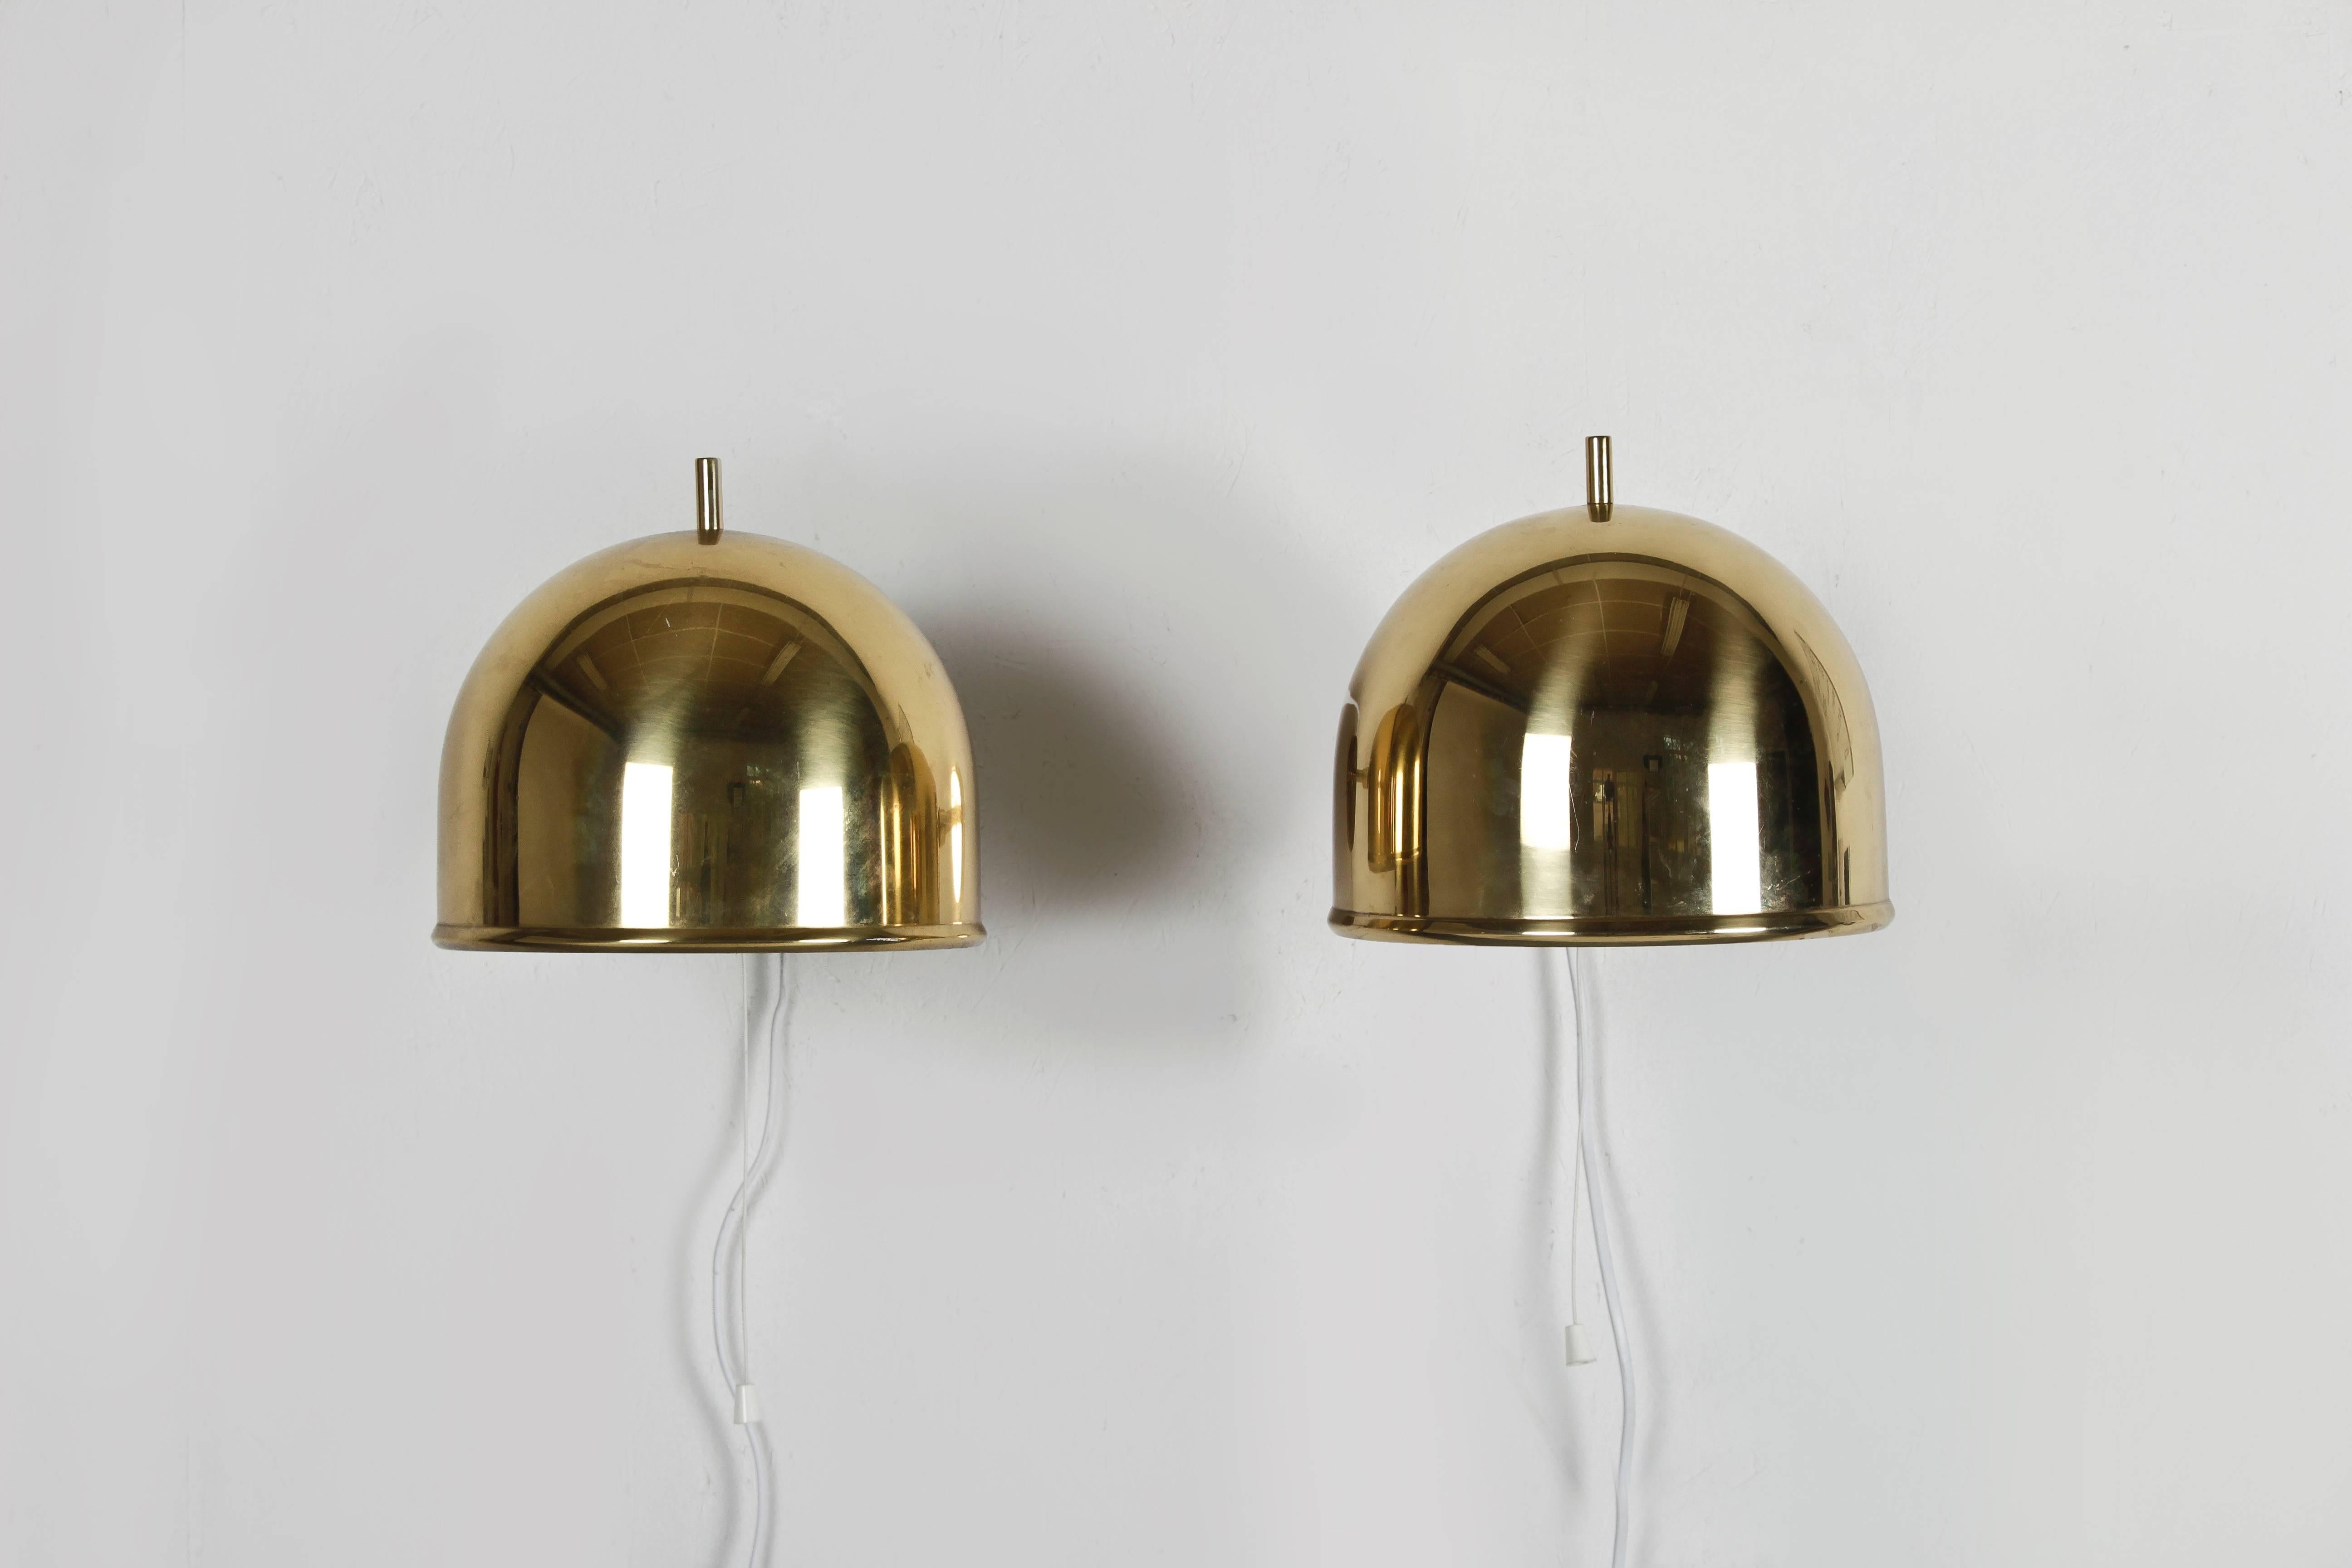 Set of two wall lamps in brass, model V-755, designed by Eje Ahlgren for Bergboms. The lamps are in good condition and have been rewired. Comes with original brass screws.